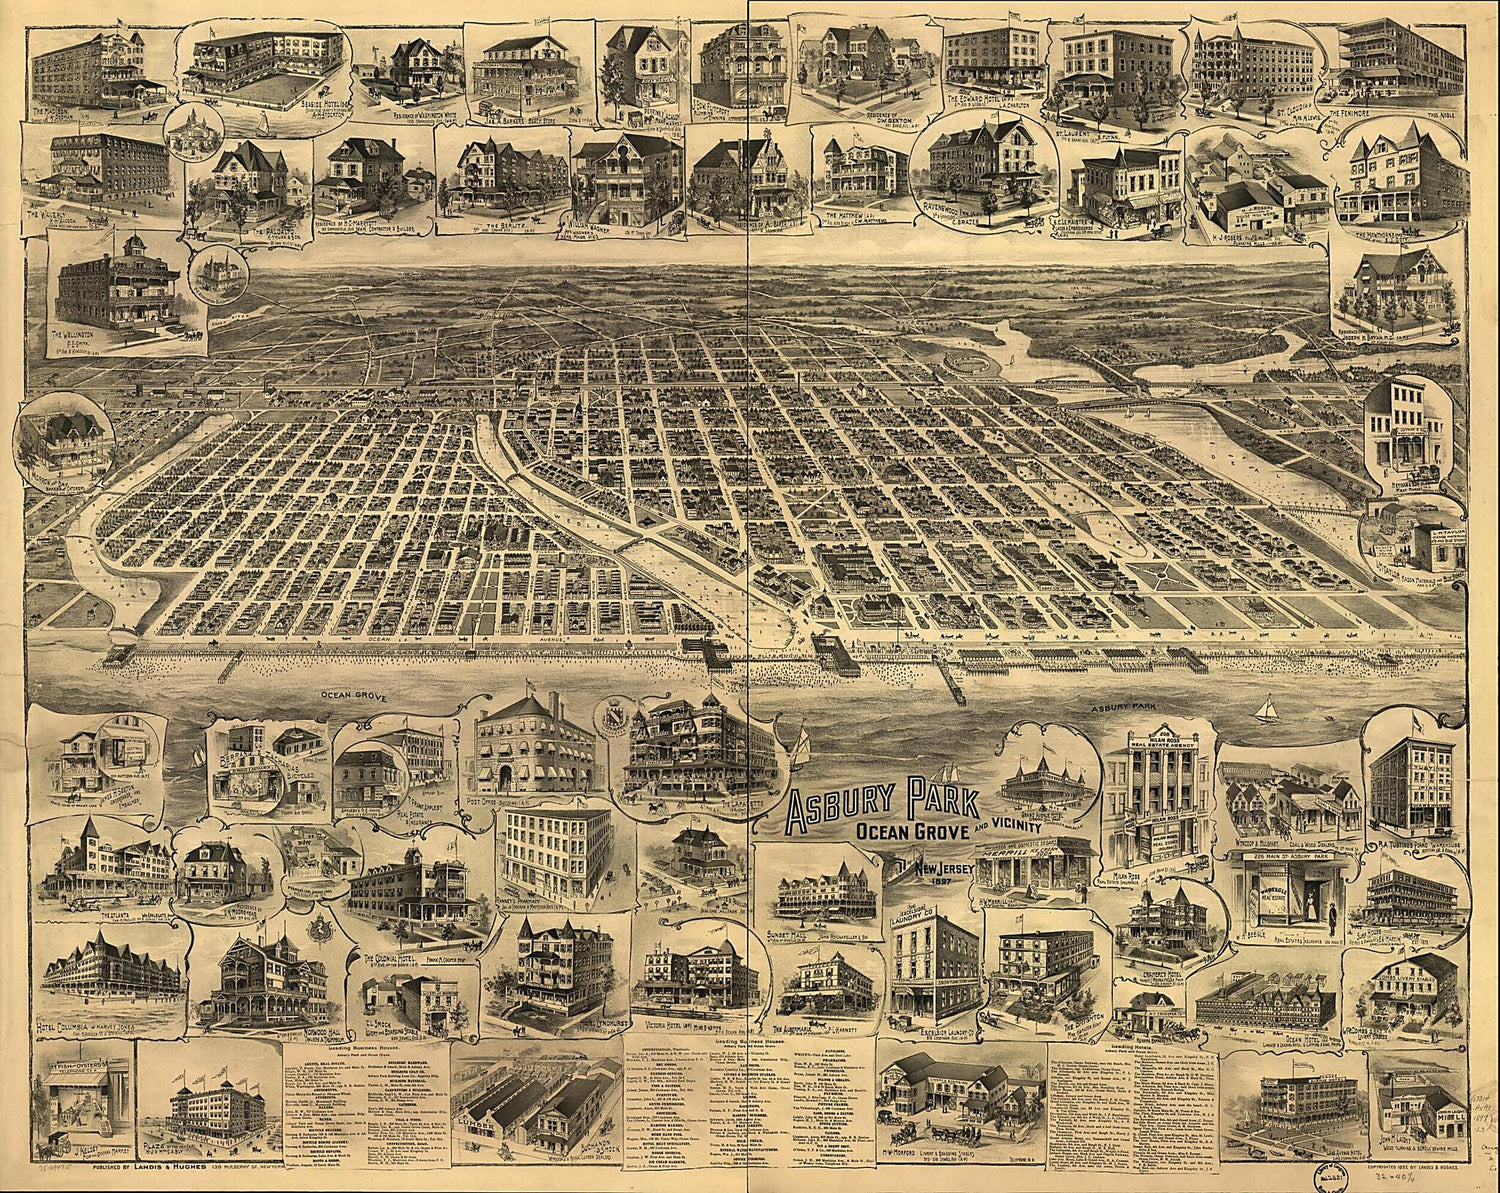 This old map of Asbury Park, Ocean Grove and Vicinity, New Jersey from 1897 was created by  Landis and Hughes in 1897